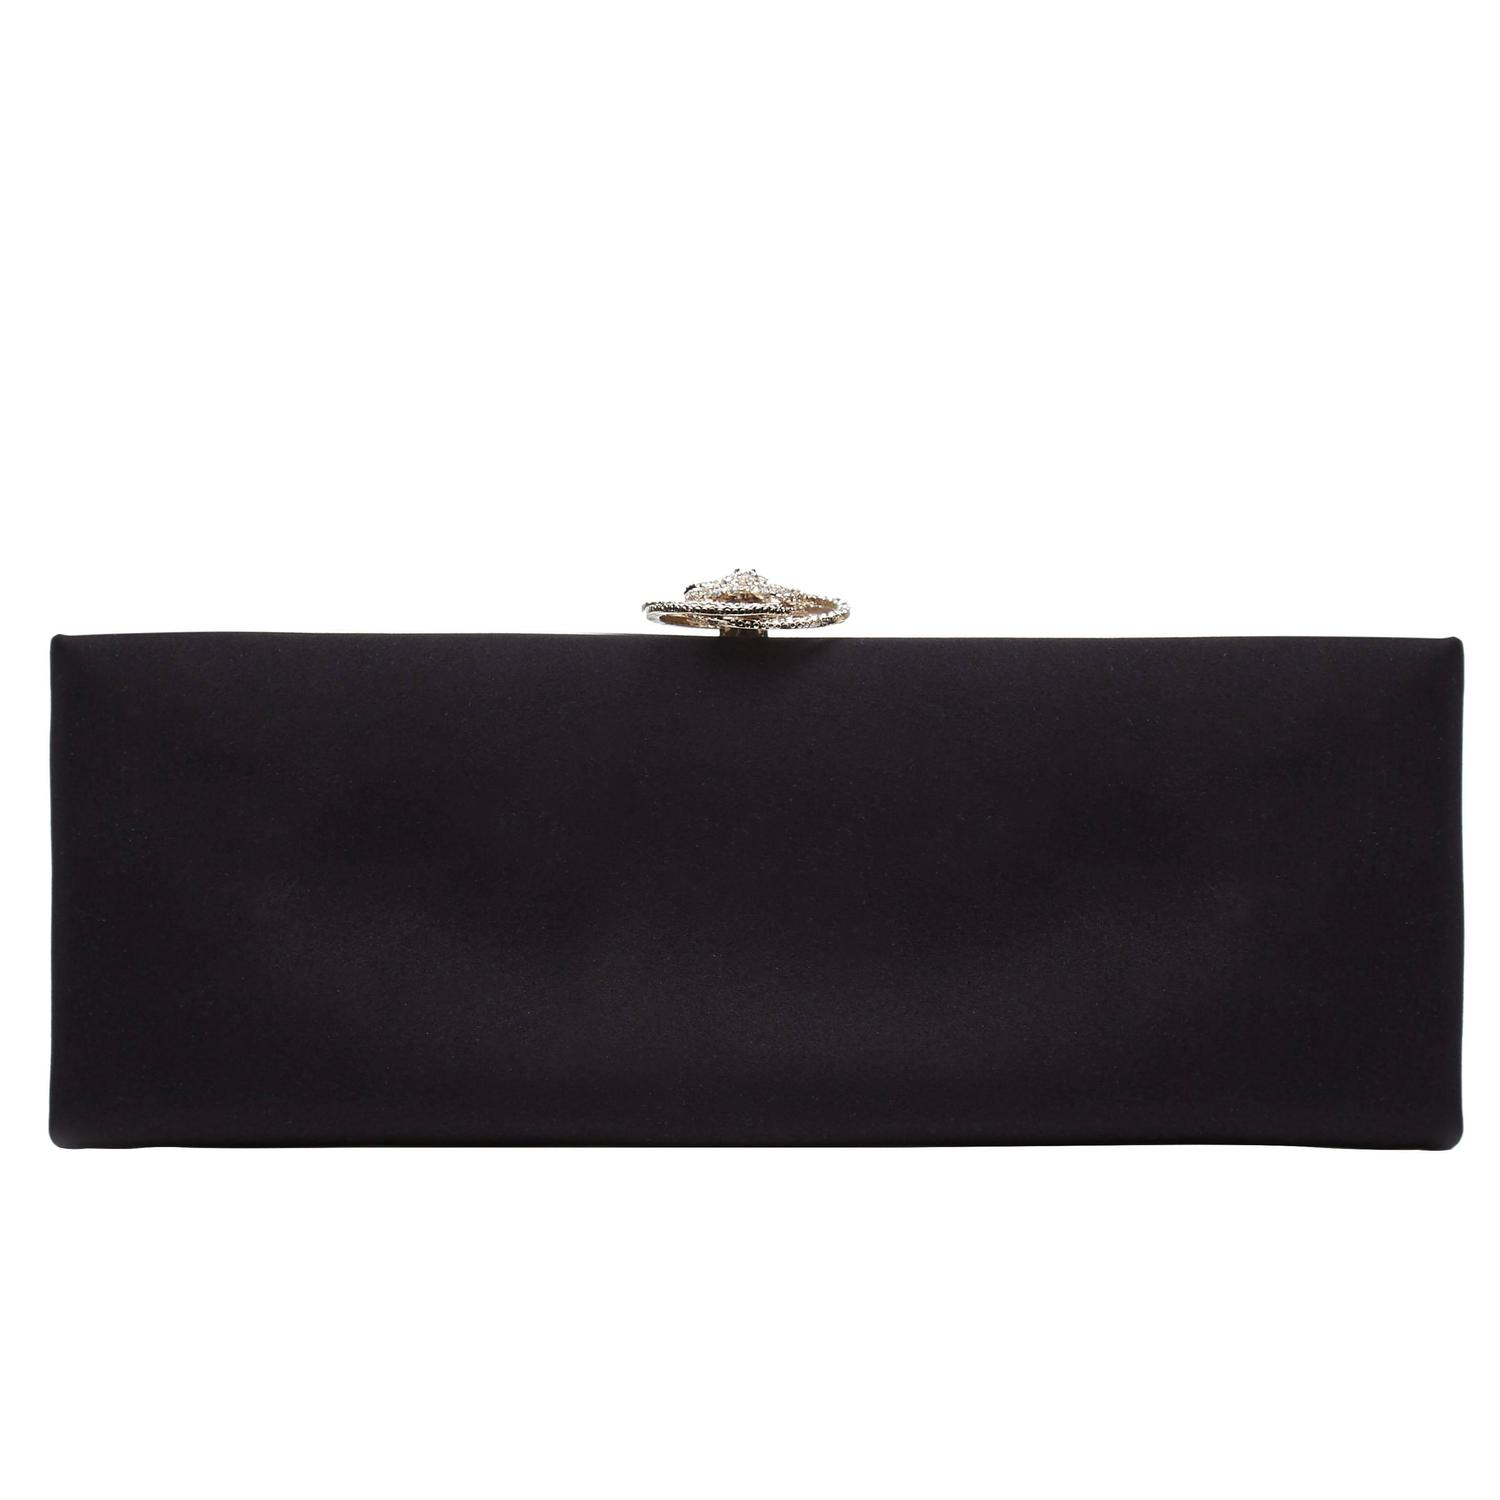 Chanel Black Satin Clutch For Sale at 1stdibs